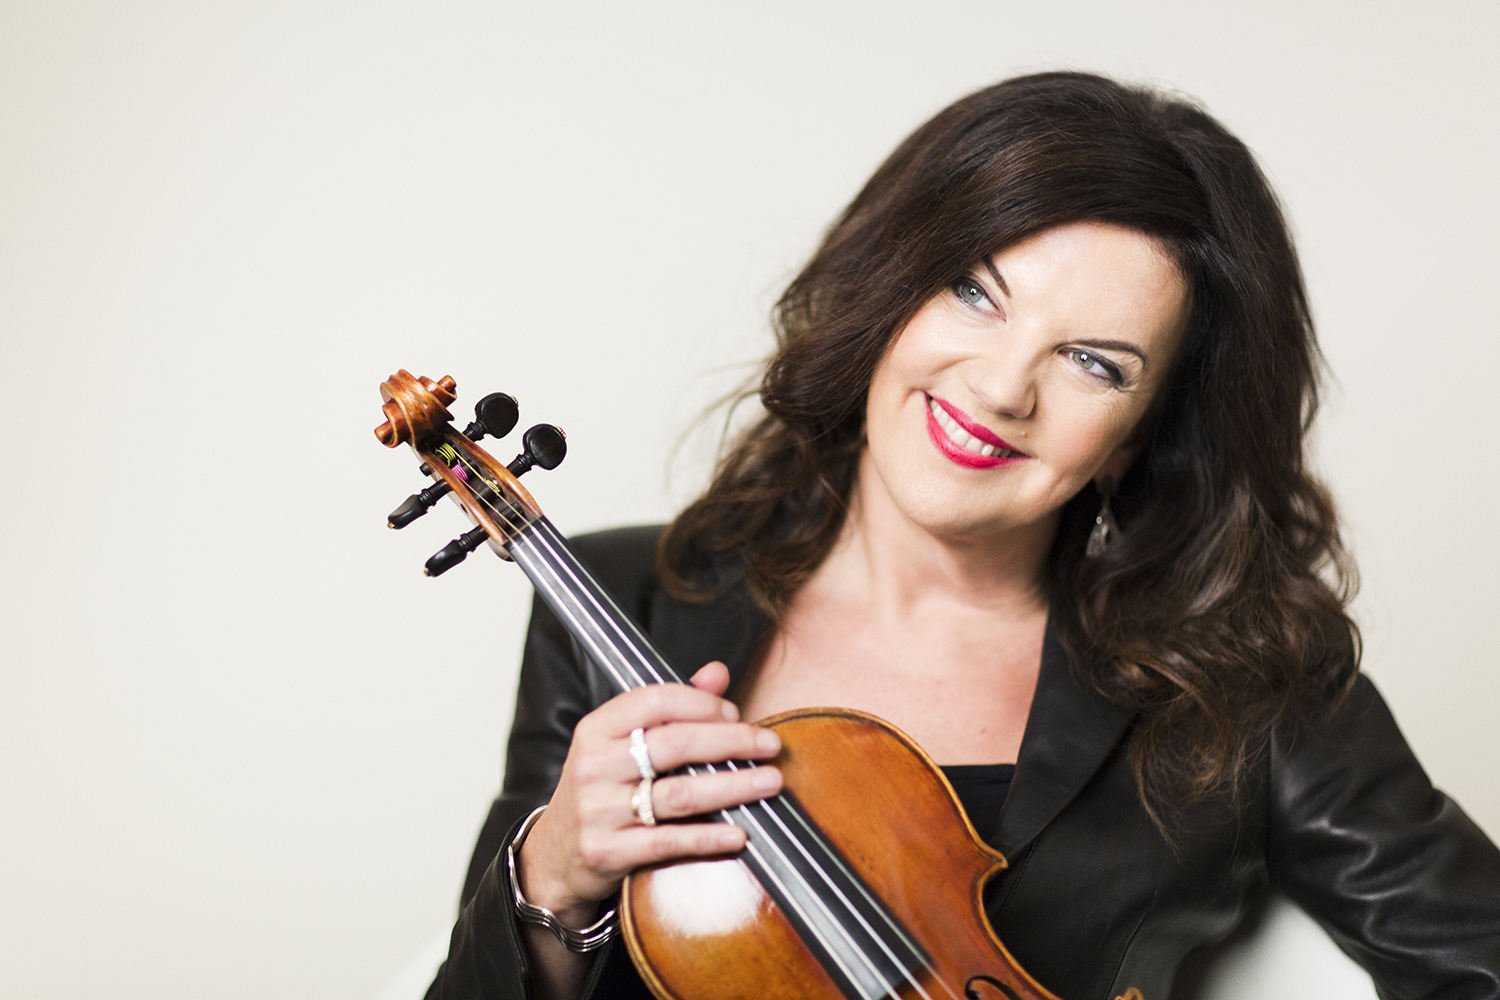 A woman with dark hair wearing black and holding a violin, smiling looking off to the side